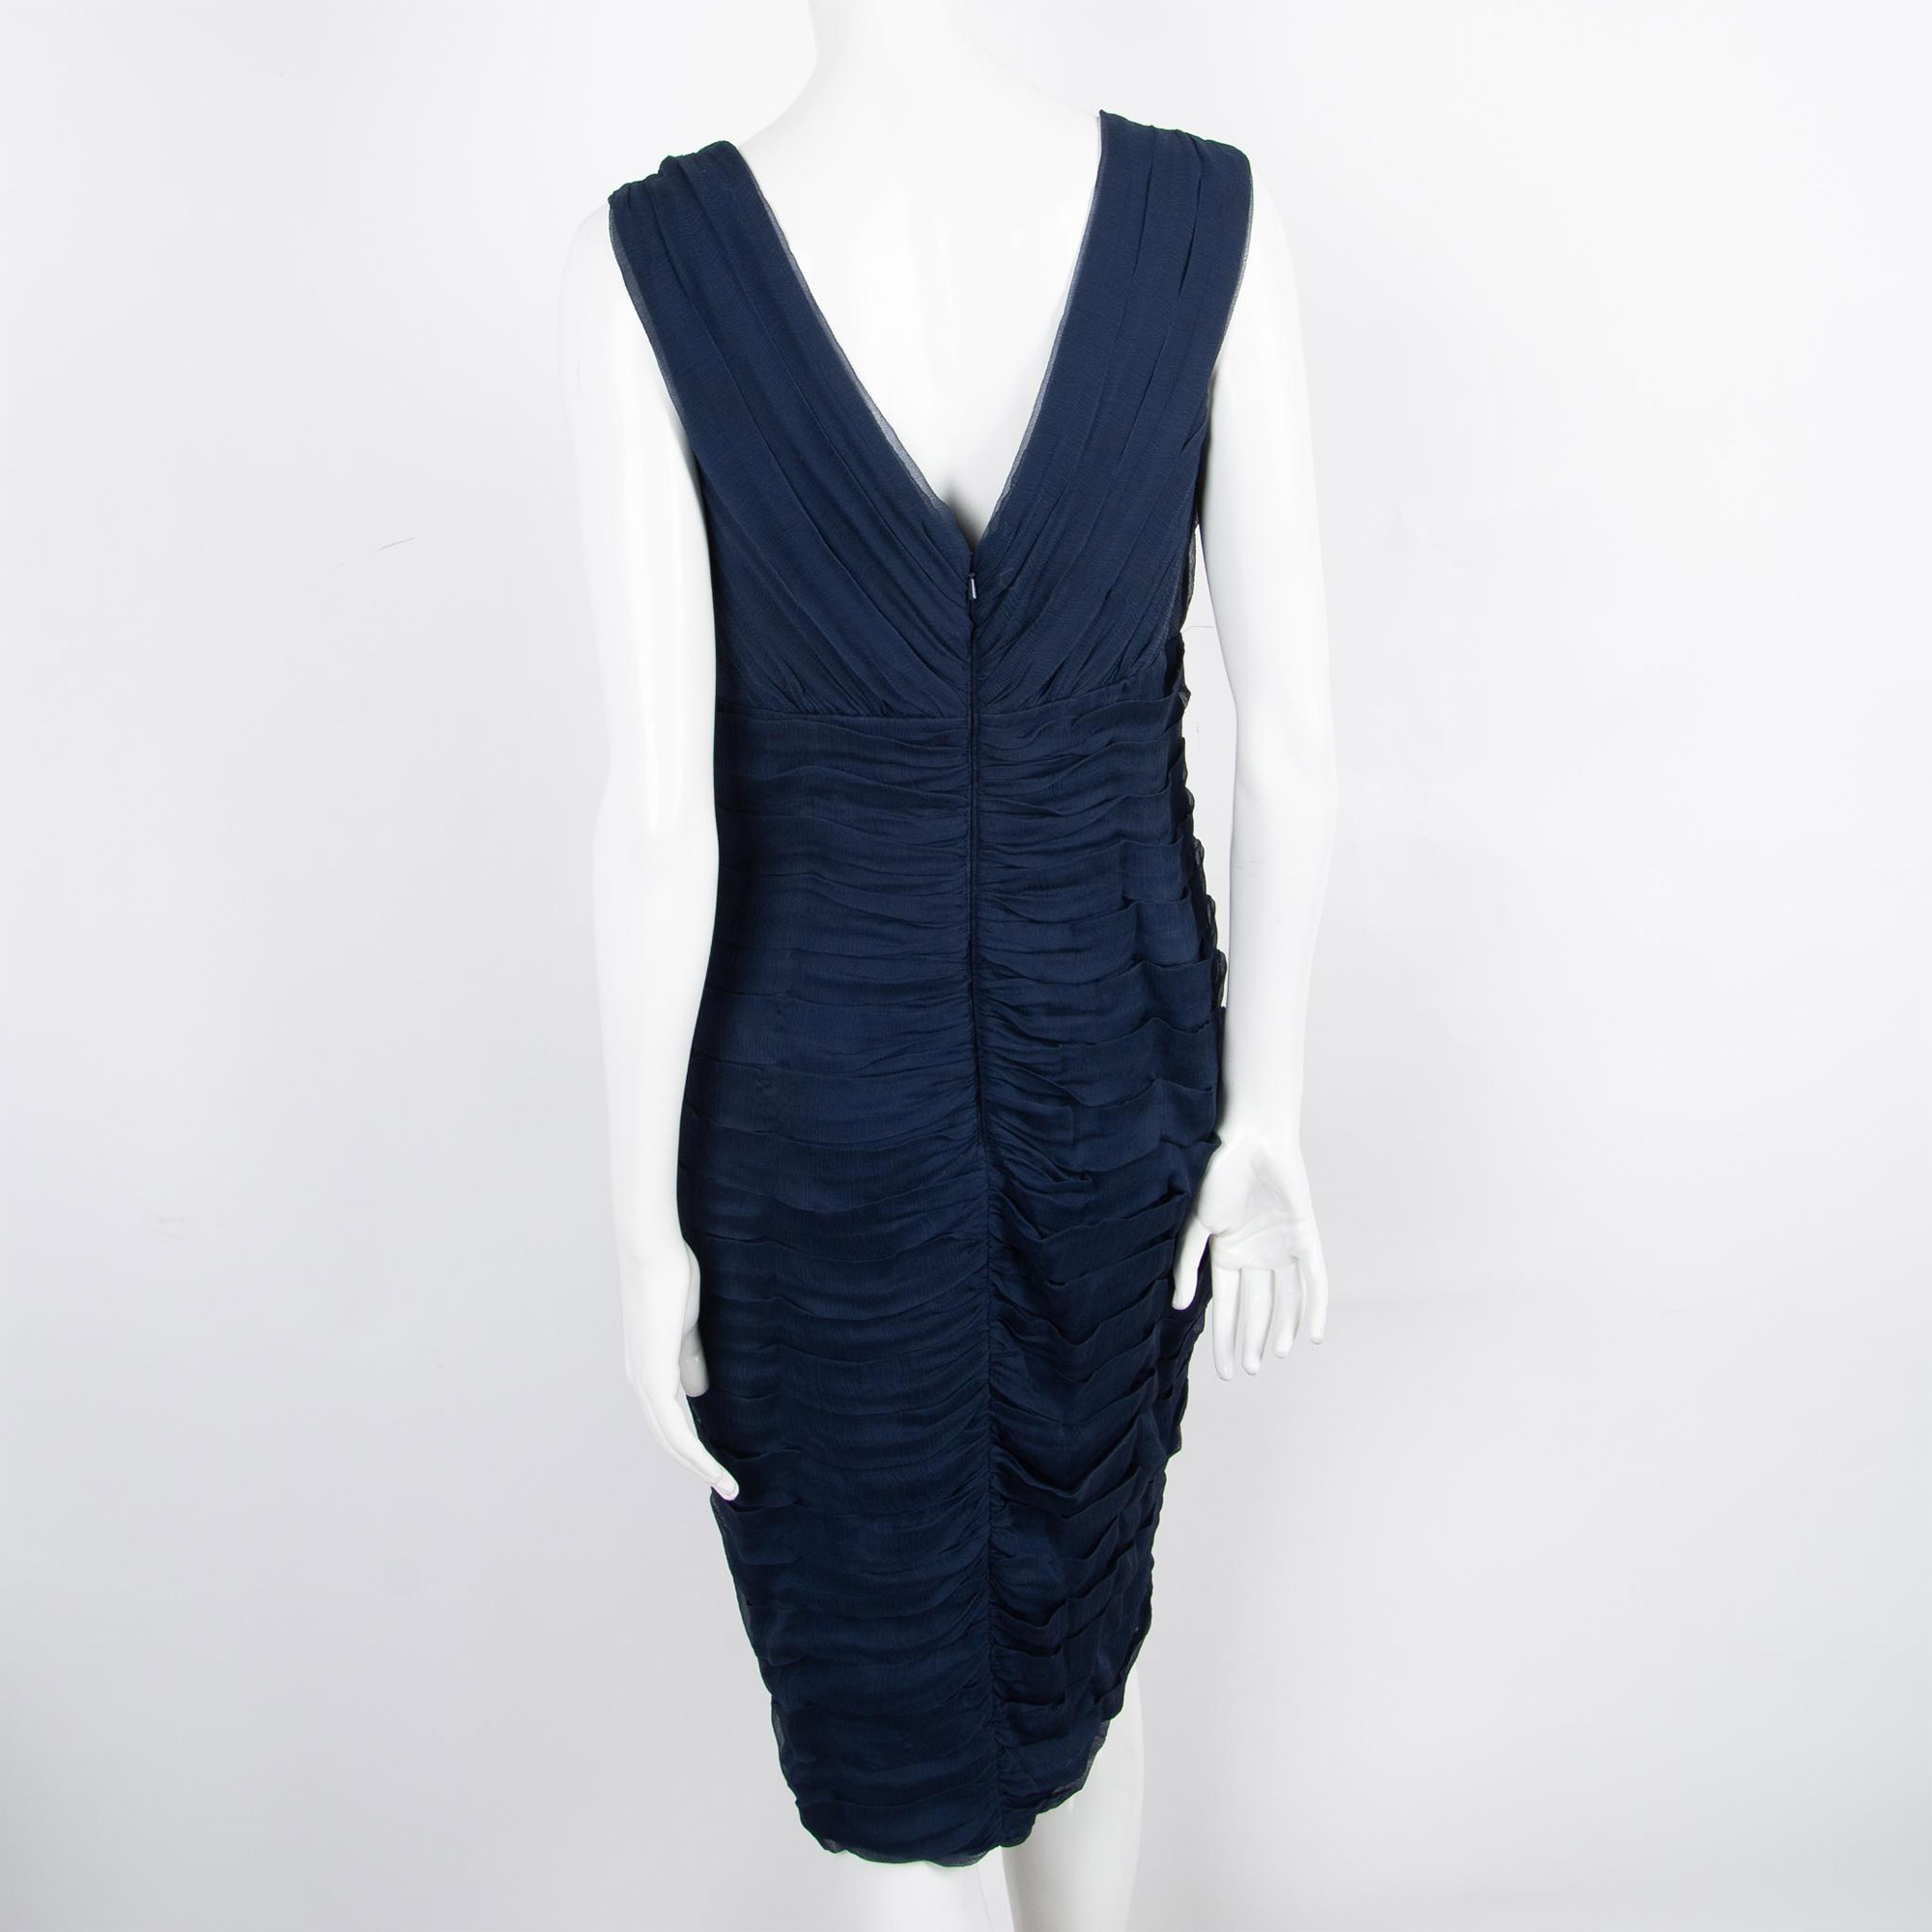 Tadashi Collection Ruched Silk Cocktail Dress, Size 12 - Image 7 of 9